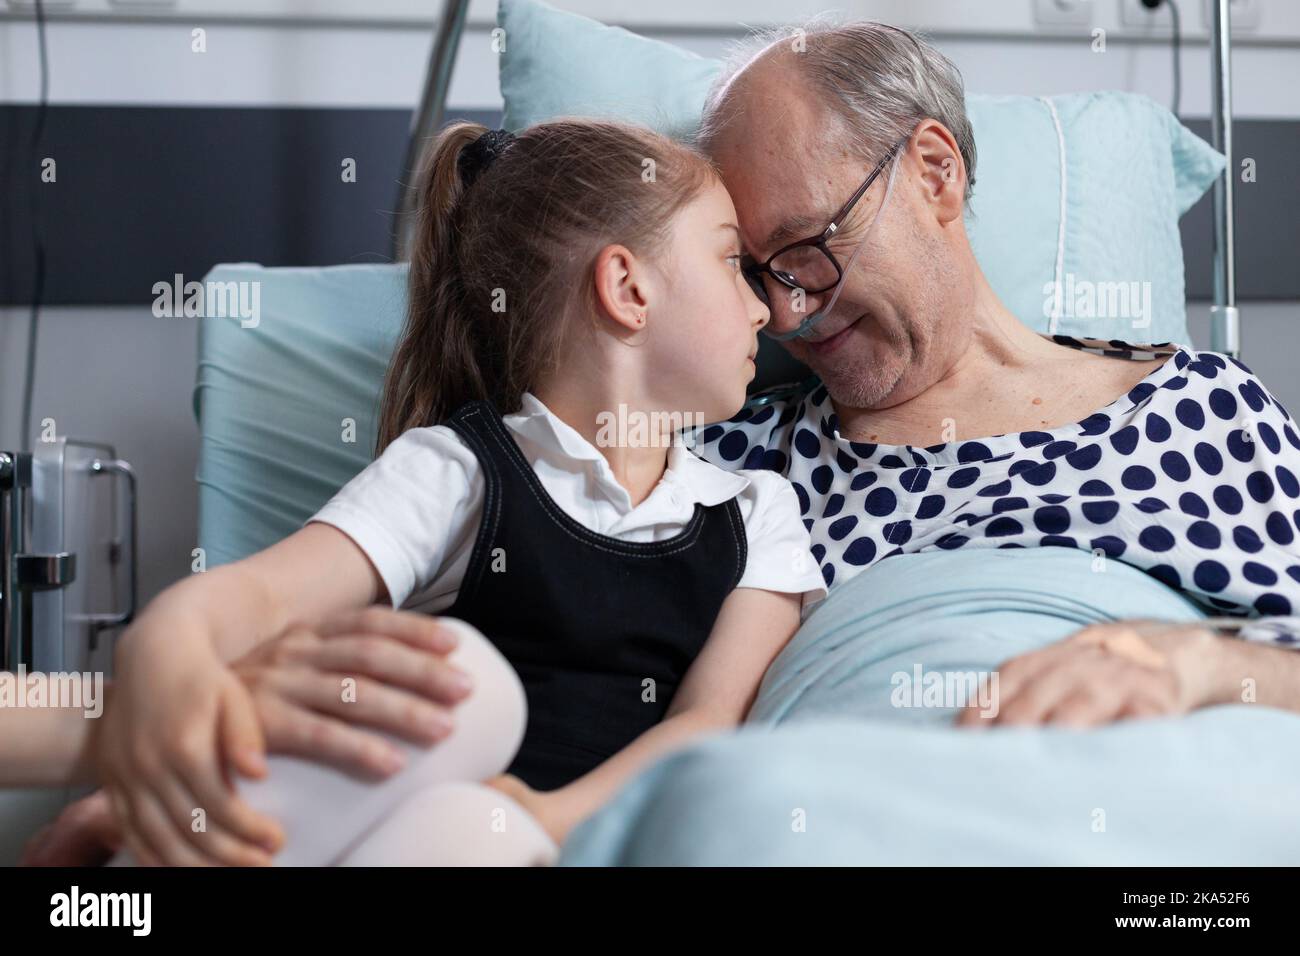 Elderly recovering patient happily cuddling infant granddaughter in hospital observation room bed. Senior man enjoying company of relatives visit in geriatric clinic room. Stock Photo